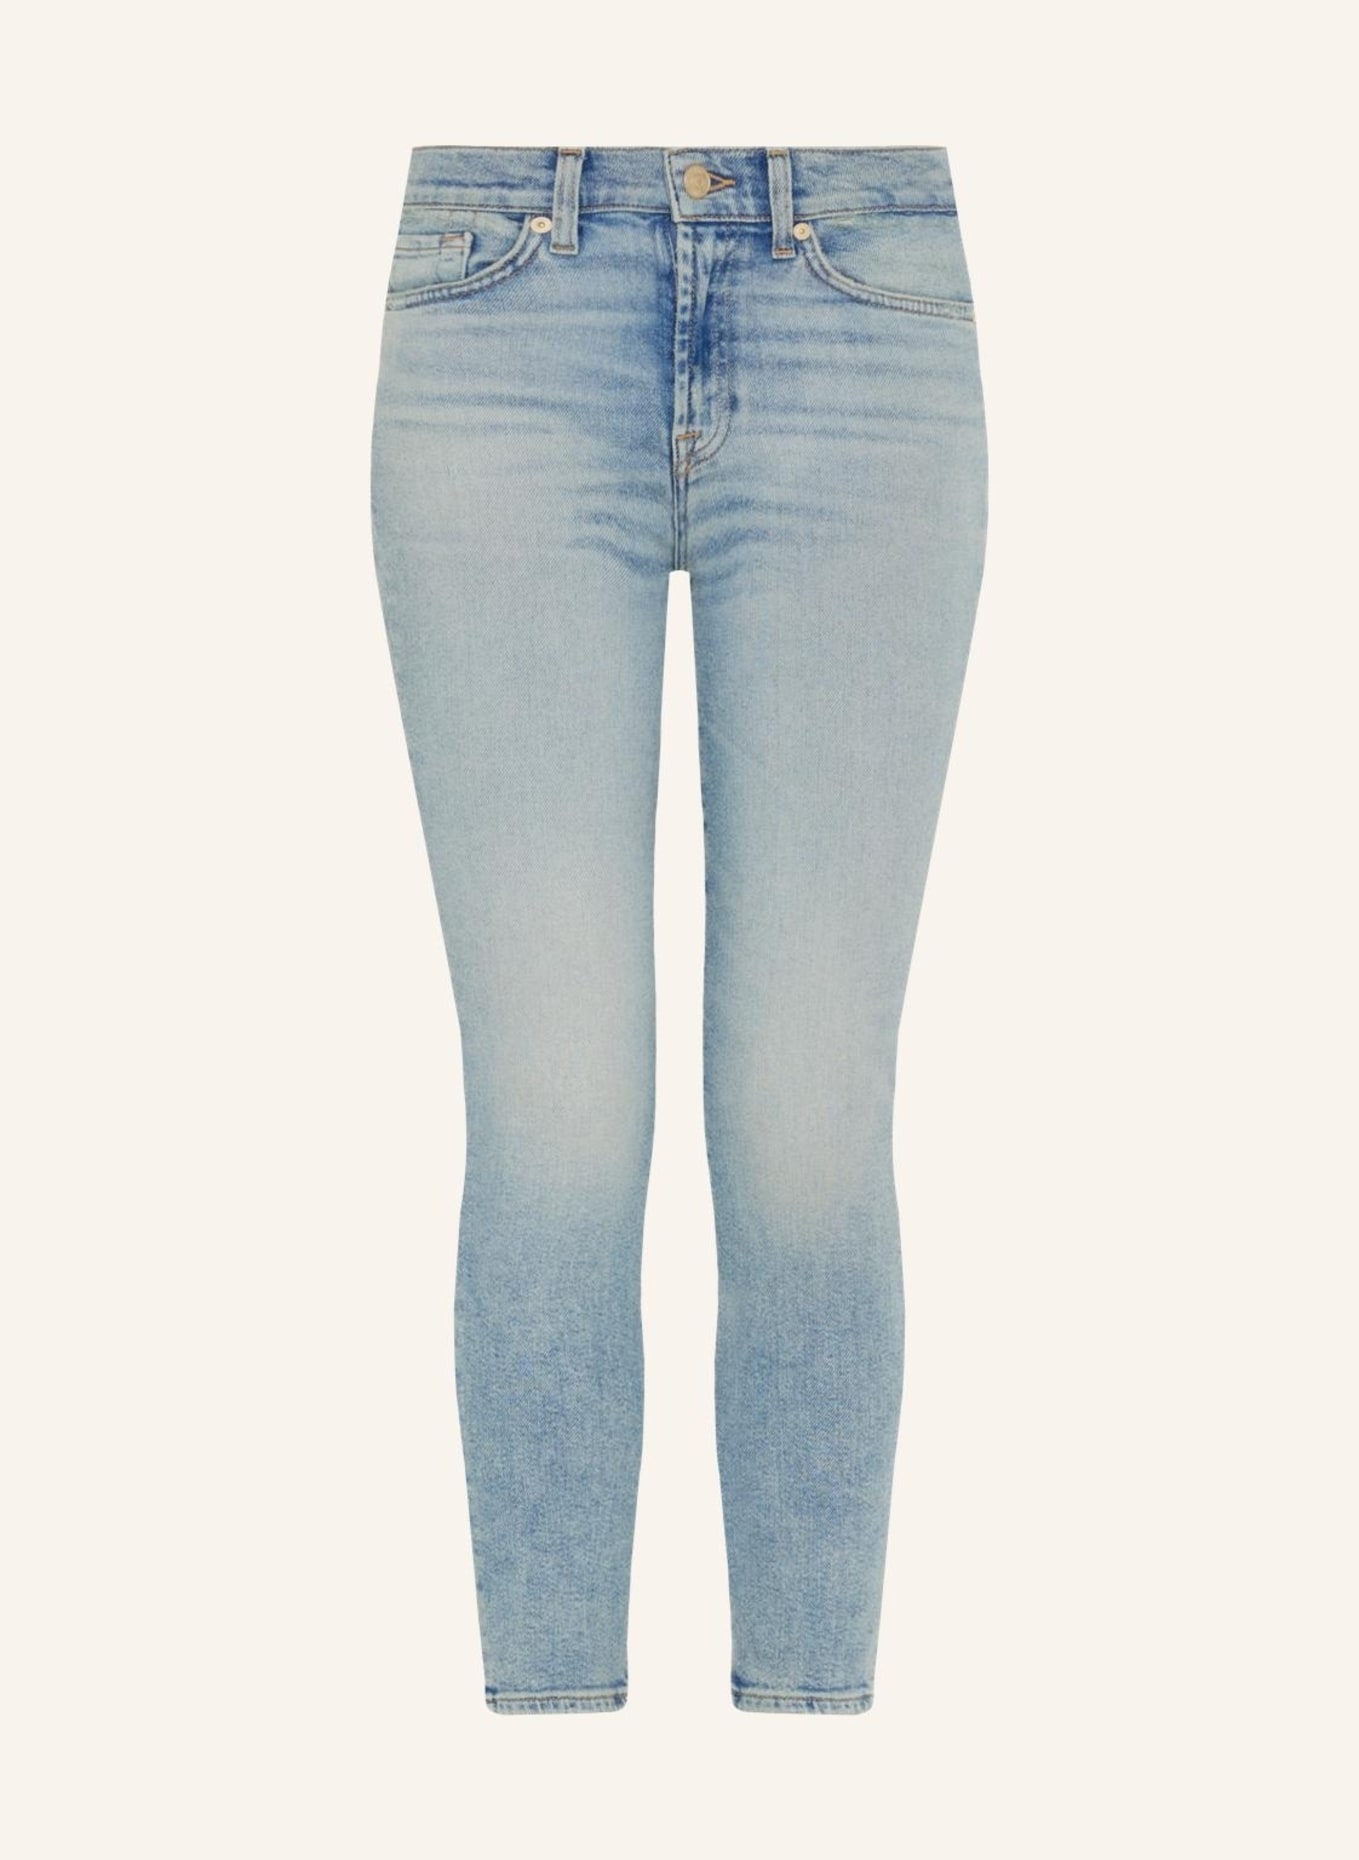 7 for all mankind Jeans ROXANNE ANKLE Slim fit, Farbe: BLAU (Bild 1)